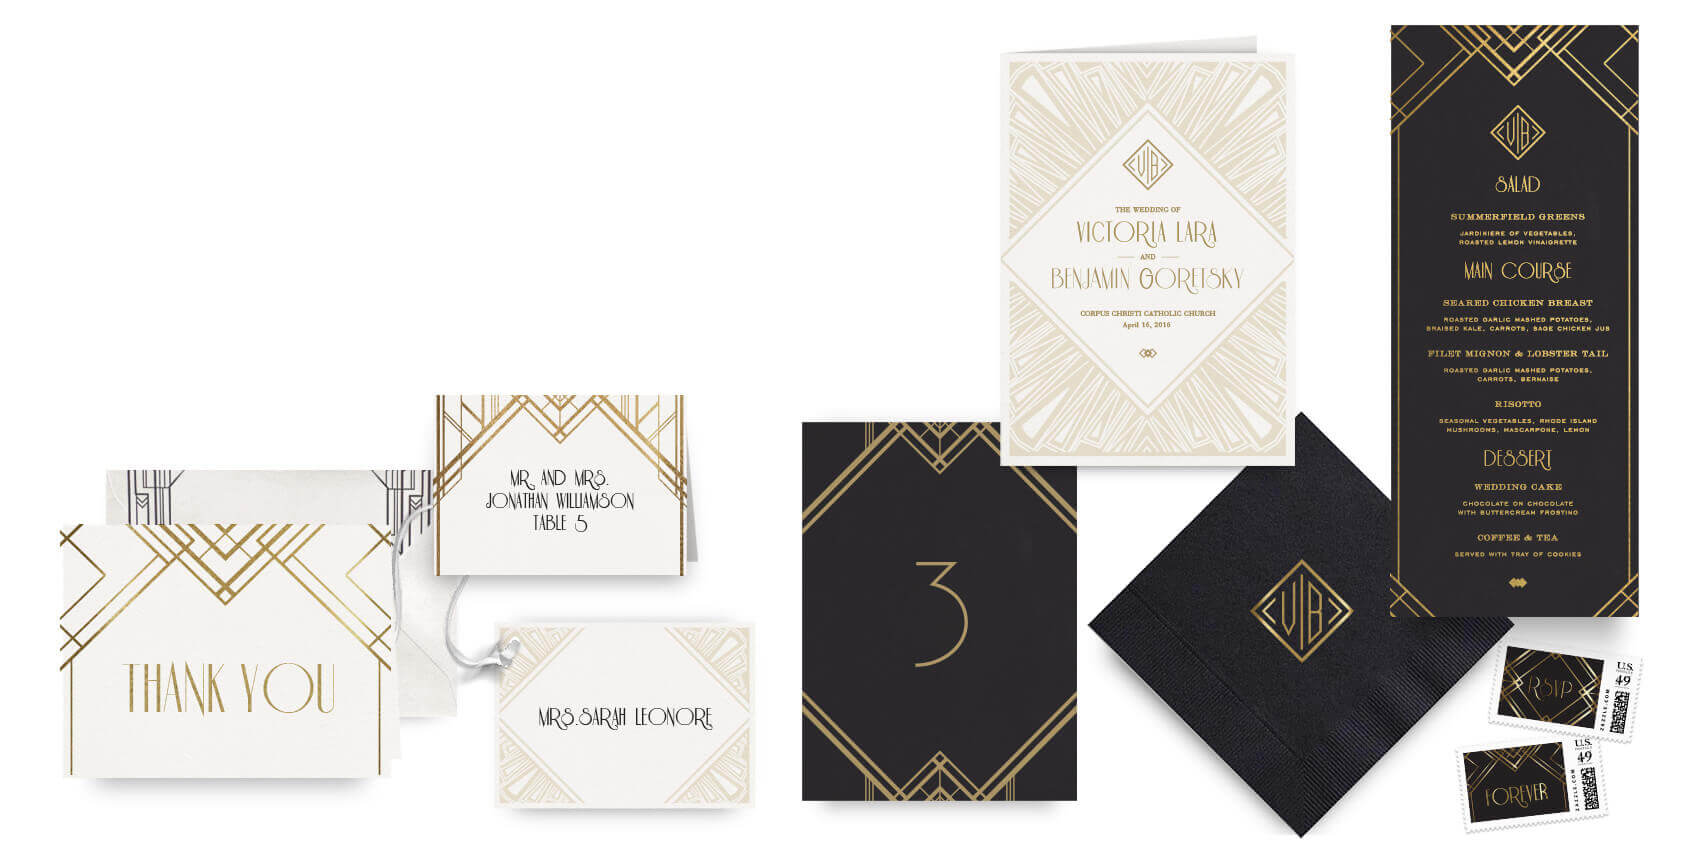 Great Gatsby menus, programs and wedding accessories